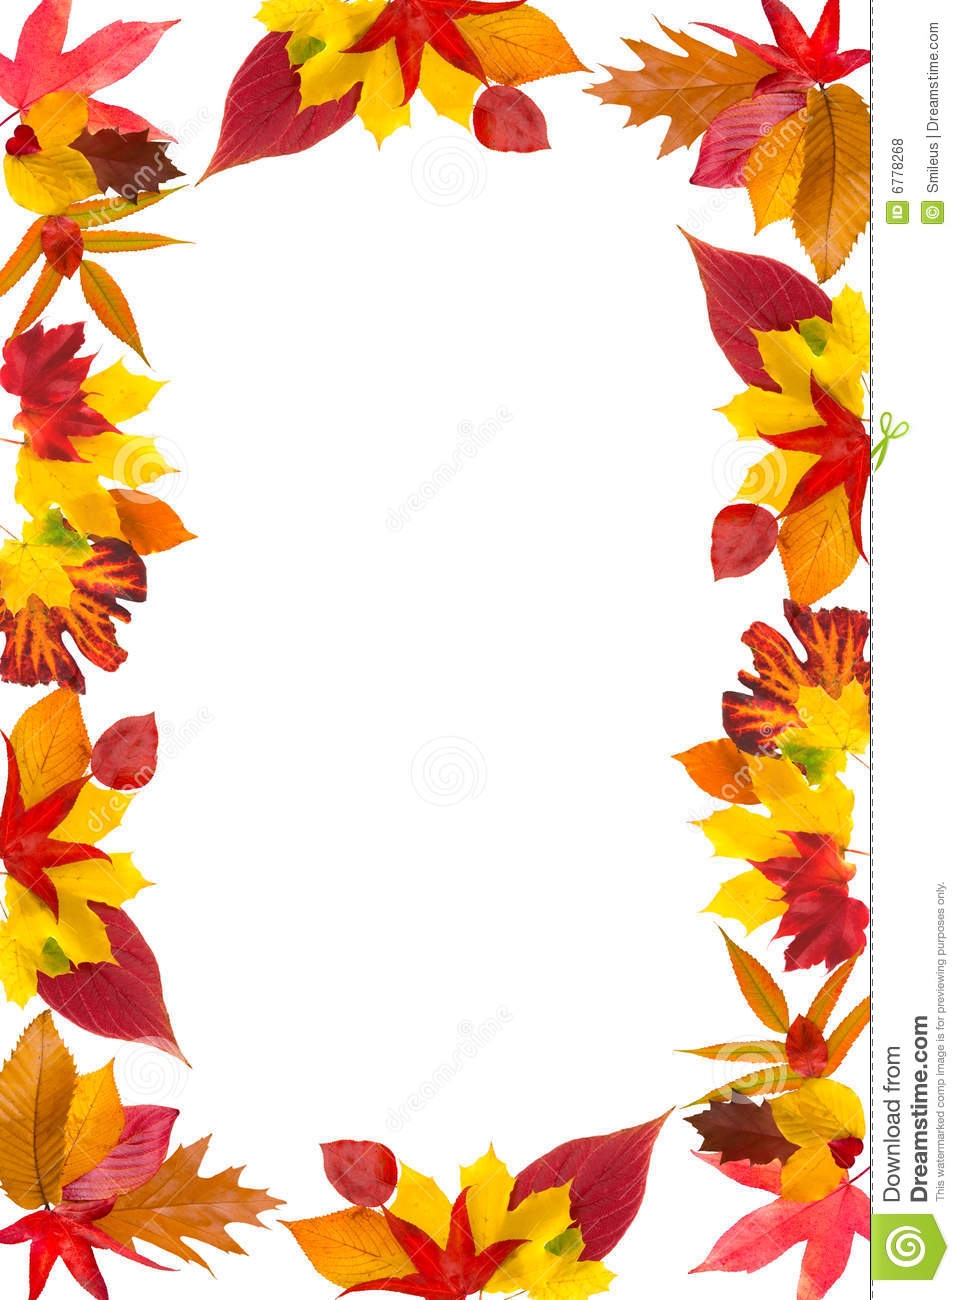 Fall Border Images | Free download on ClipArtMag